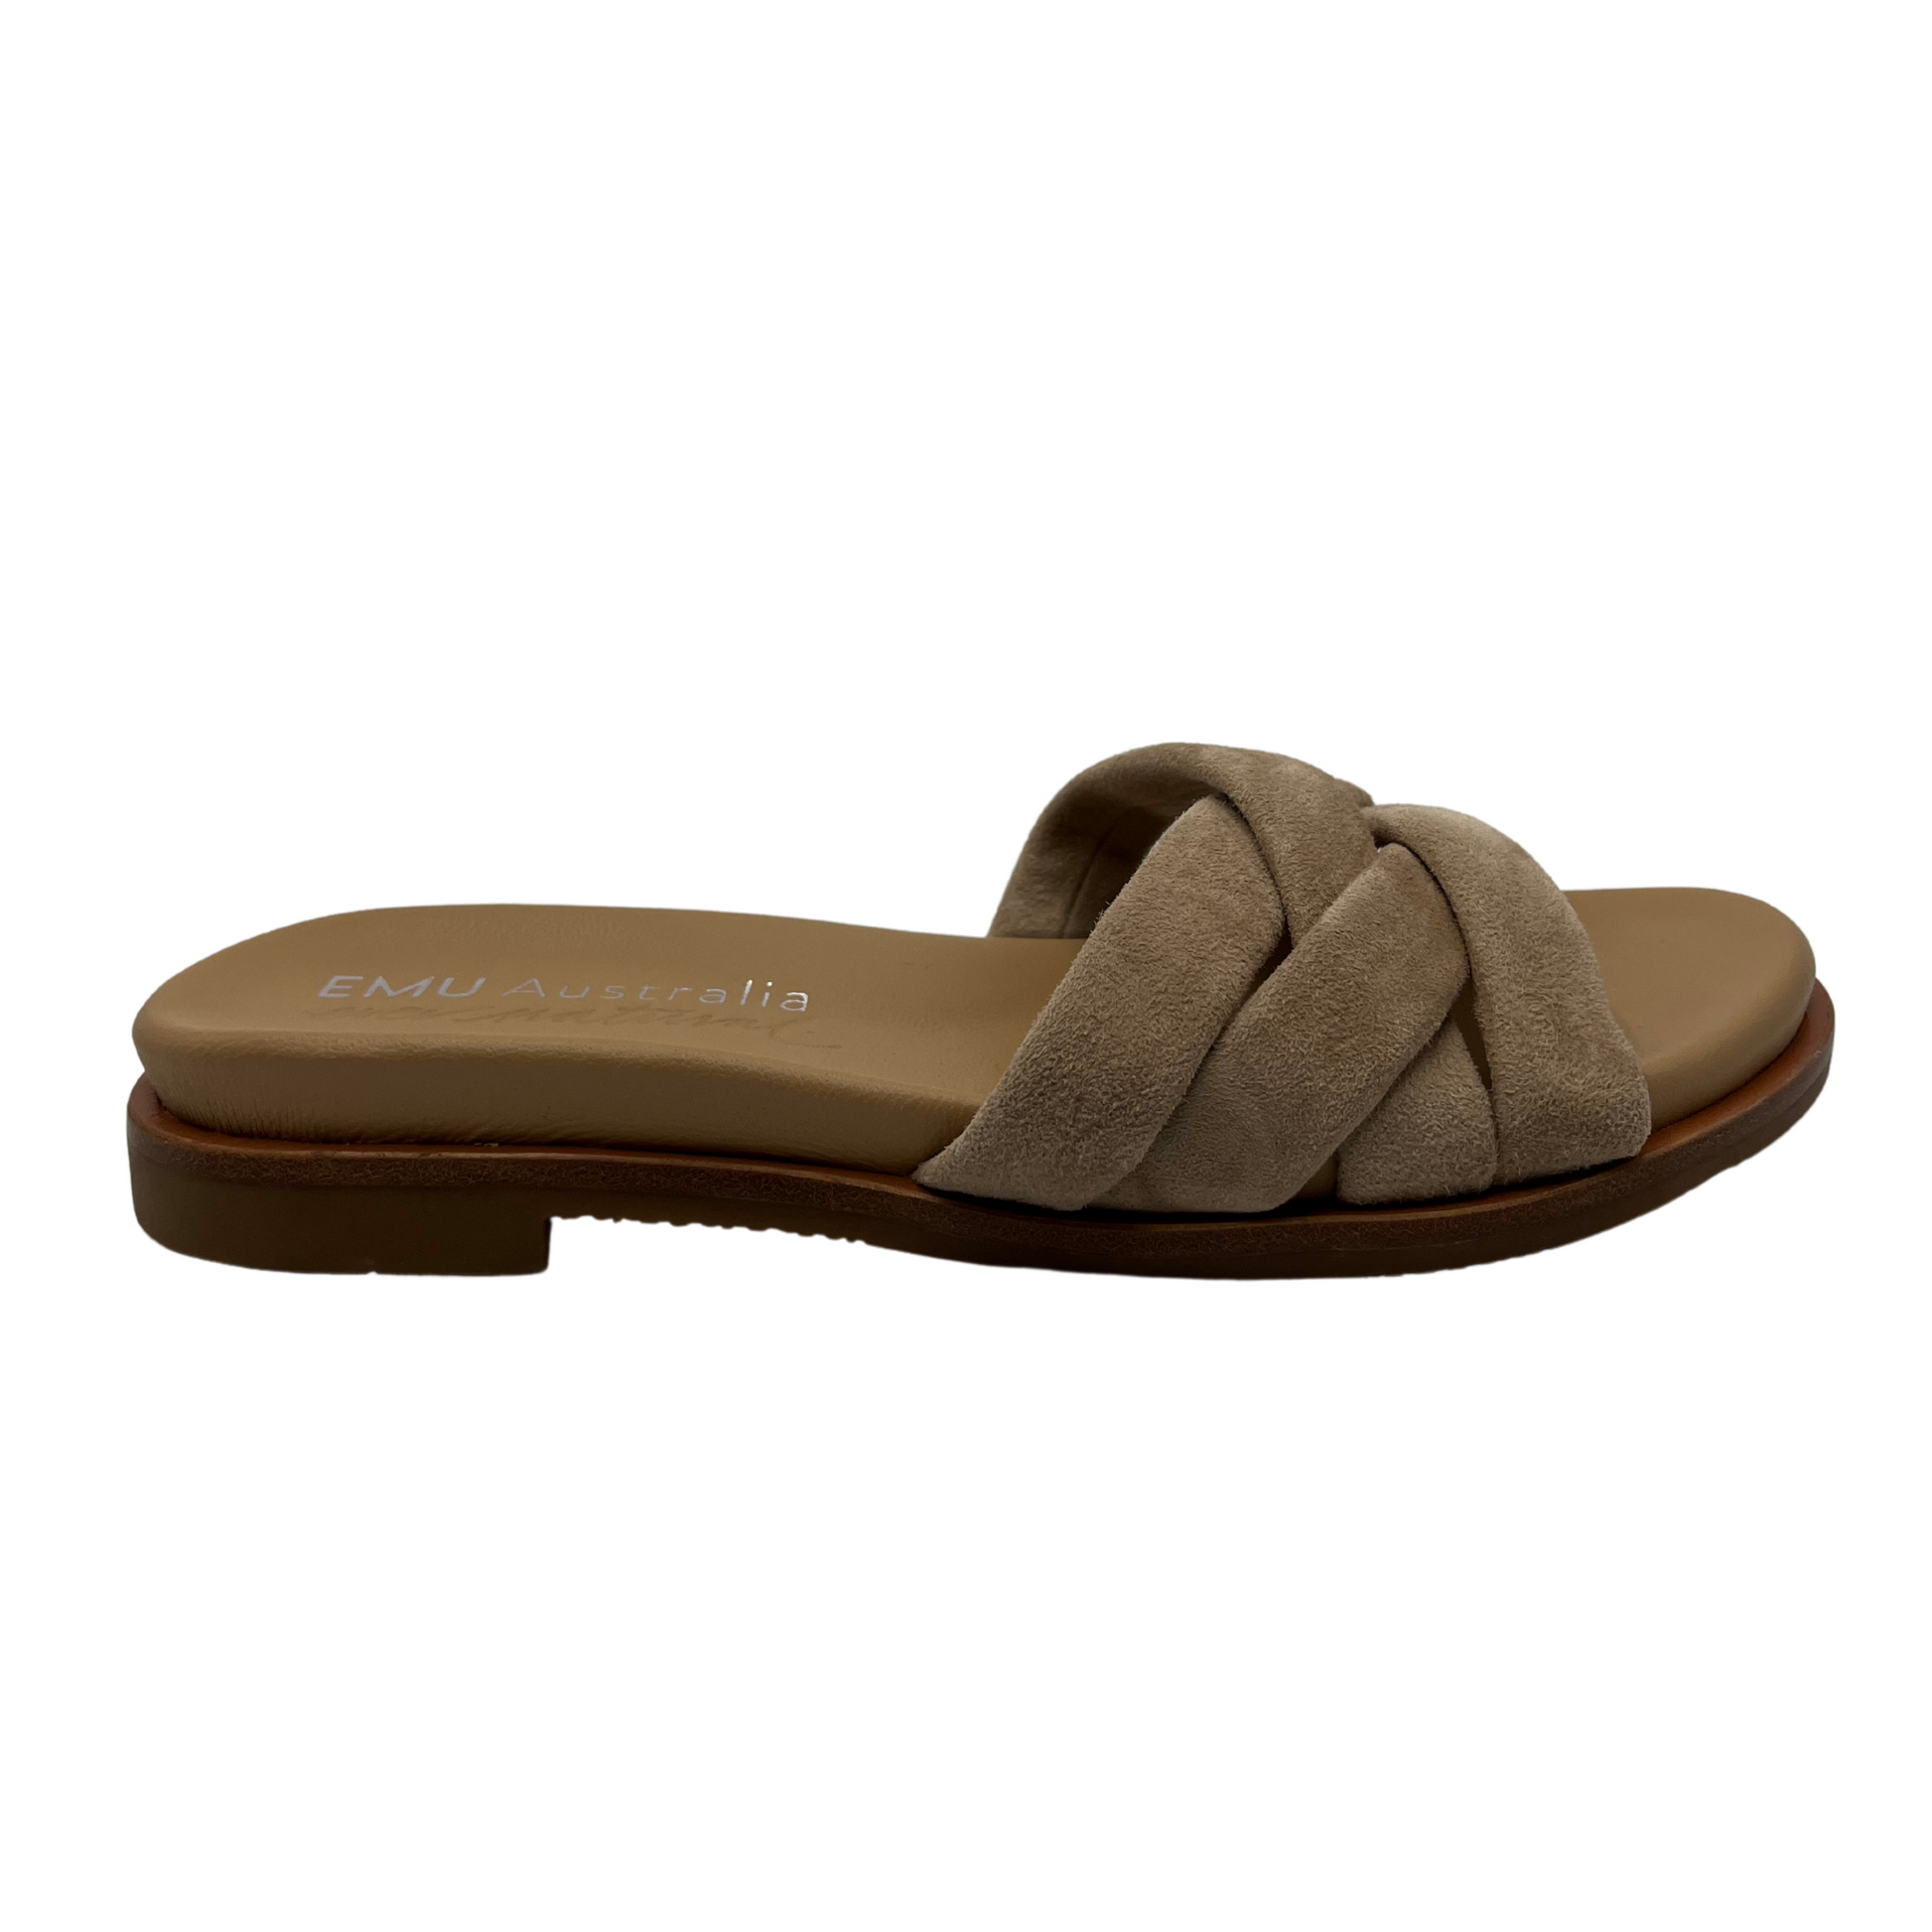 Right facing view of taupe suede slip on sandal with padded upper and footbed. Cross strap design and low heel.